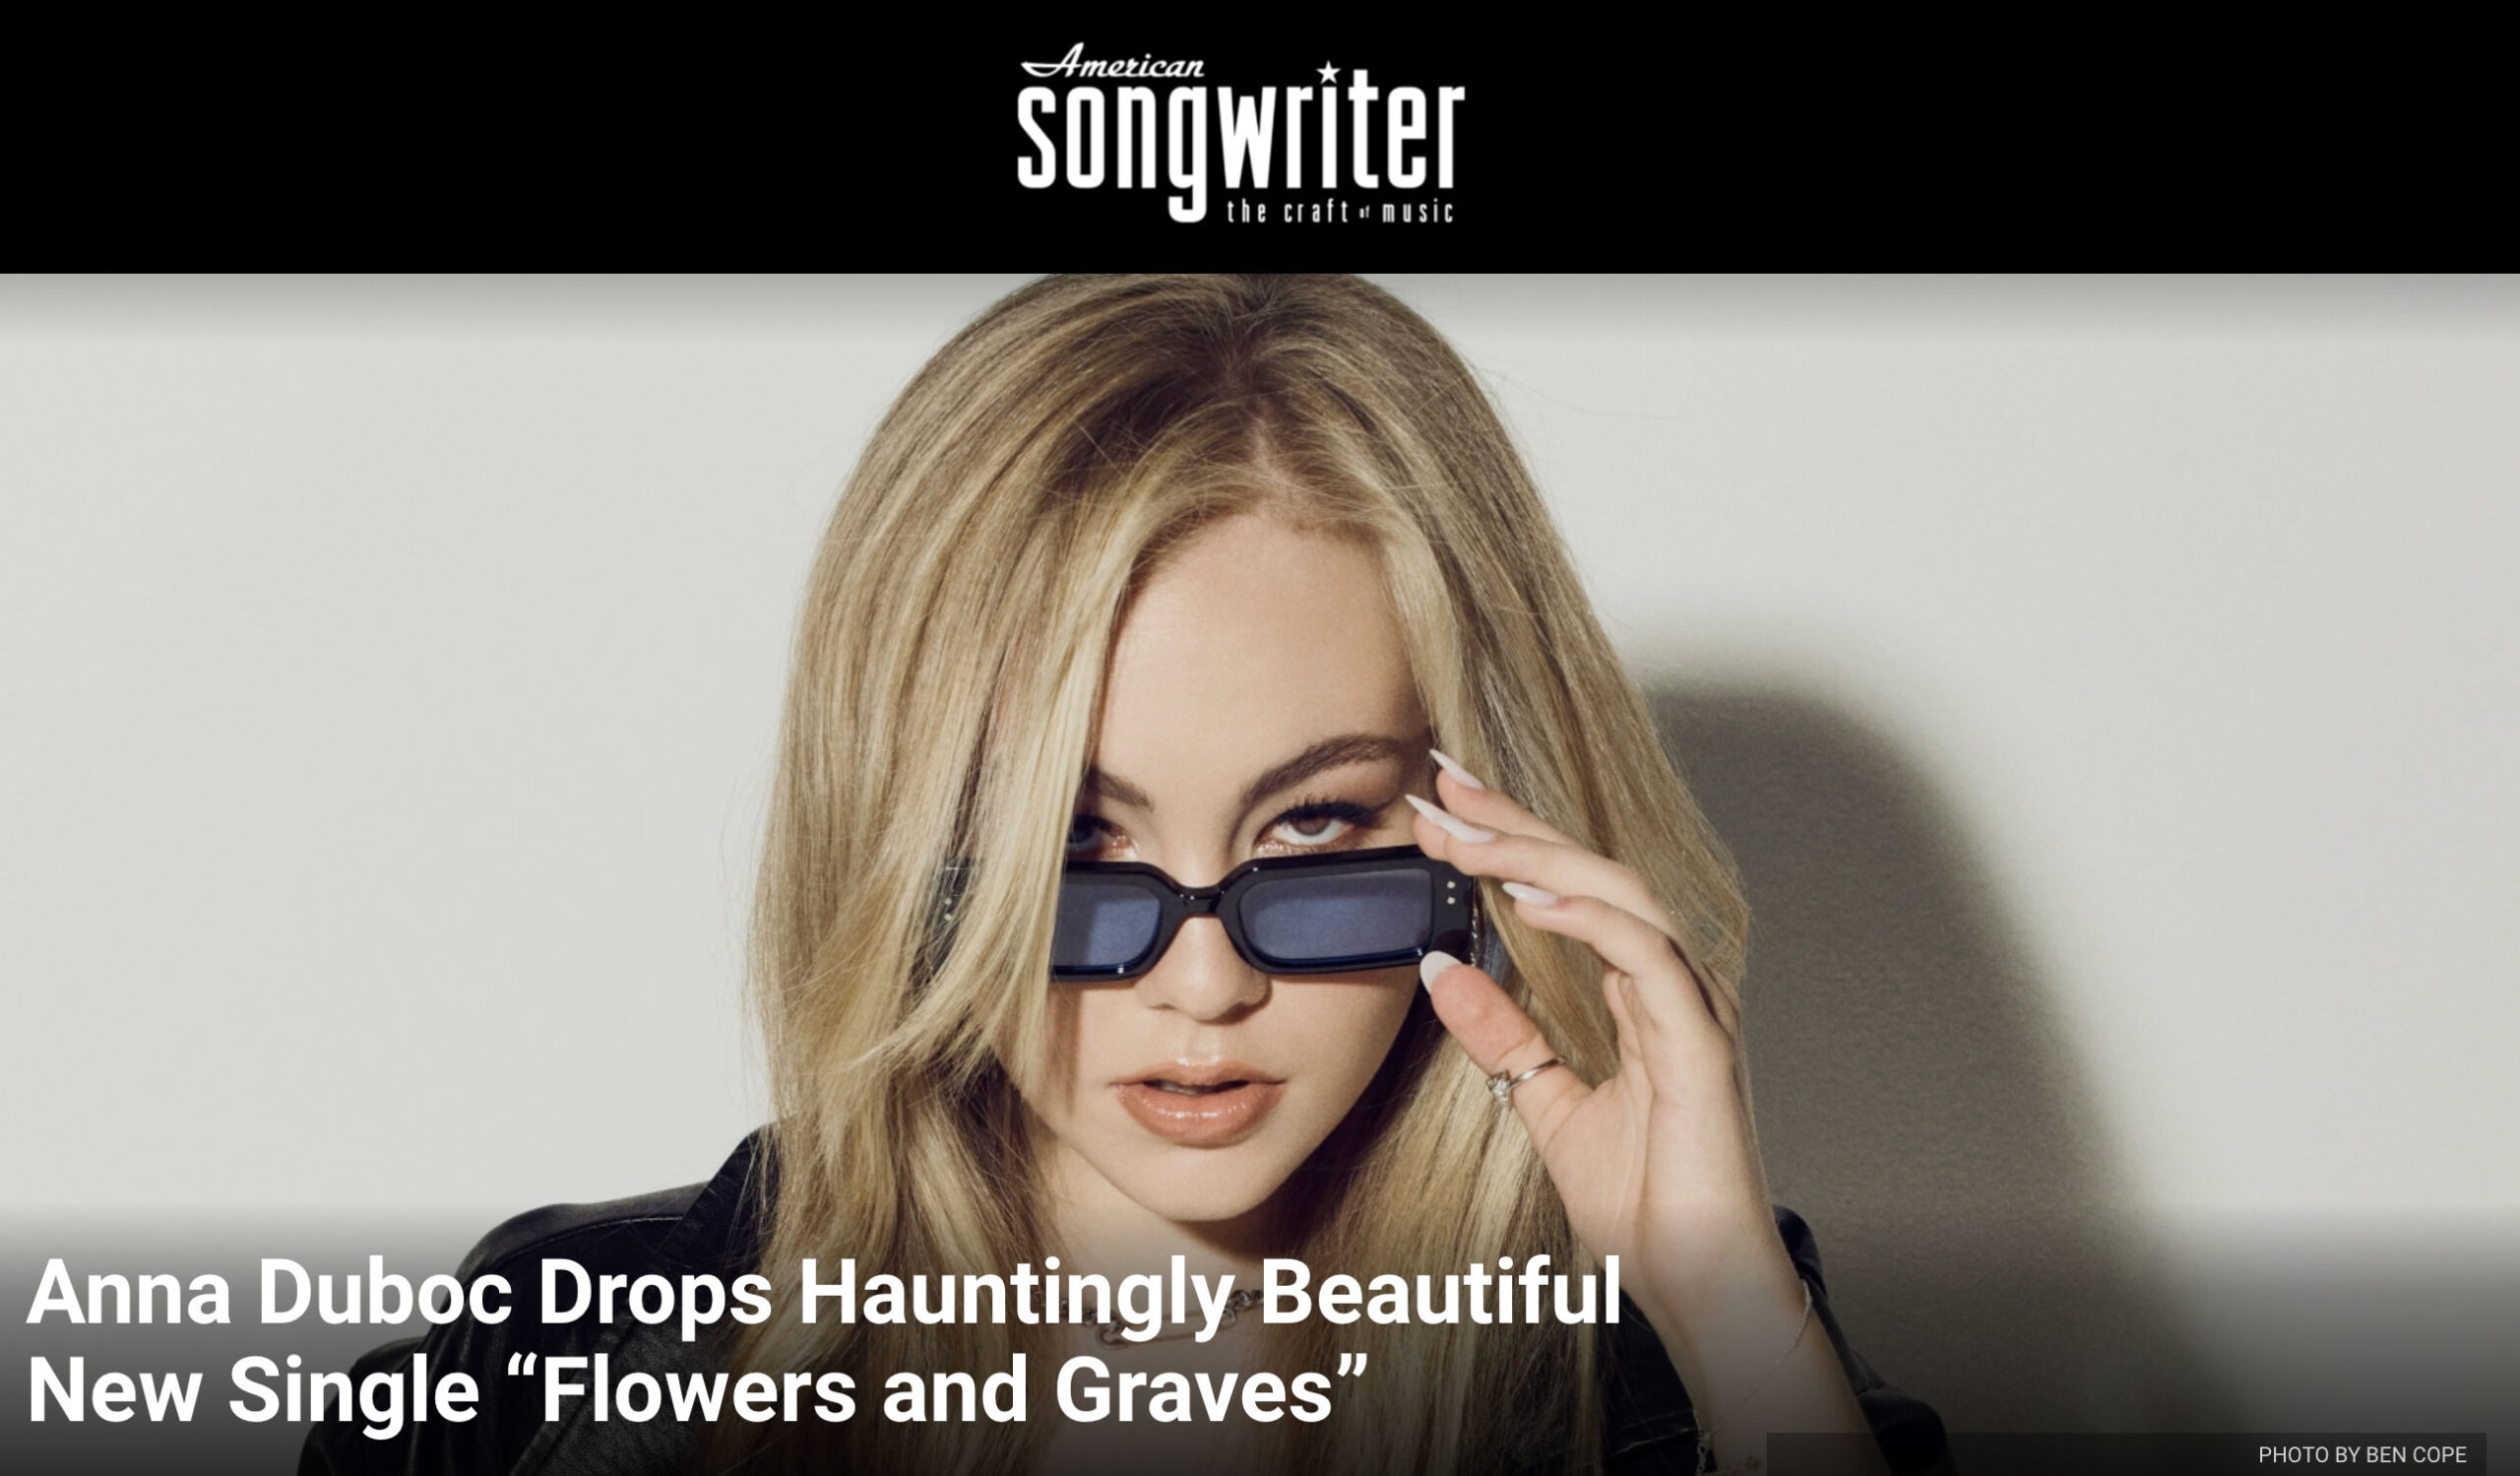 Anna Duboc Drops Hauntingly Beautiful New Single “Flowers and Graves”